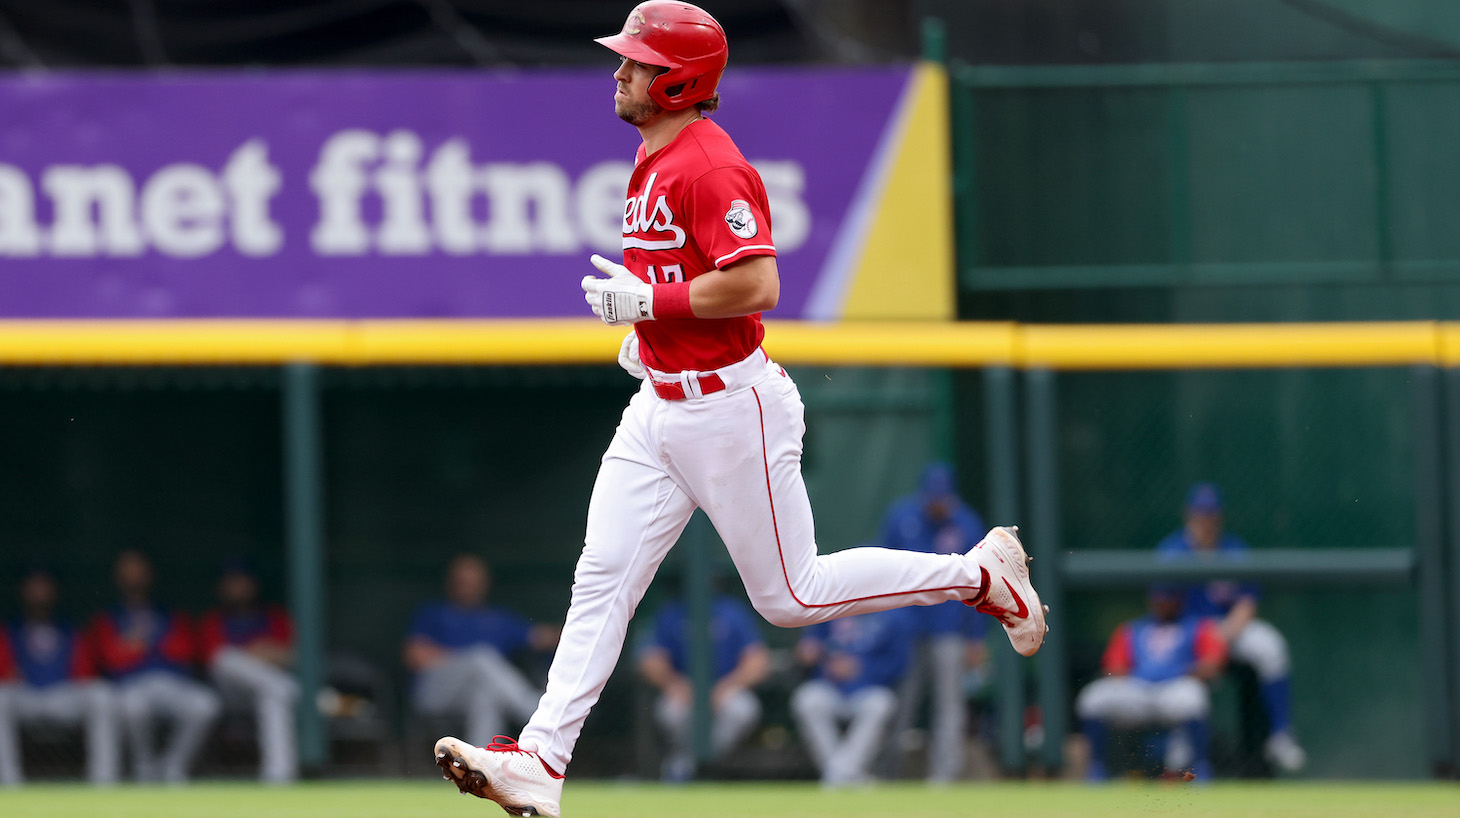 CINCINNATI, OHIO - MAY 26: Kyle Farmer #17 of the Cincinnati Reds rounds the bases after hitting a home run in the second inning against the Chicago Cubs at Great American Ball Park on May 26, 2022 in Cincinnati, Ohio. (Photo by Dylan Buell/Getty Images)